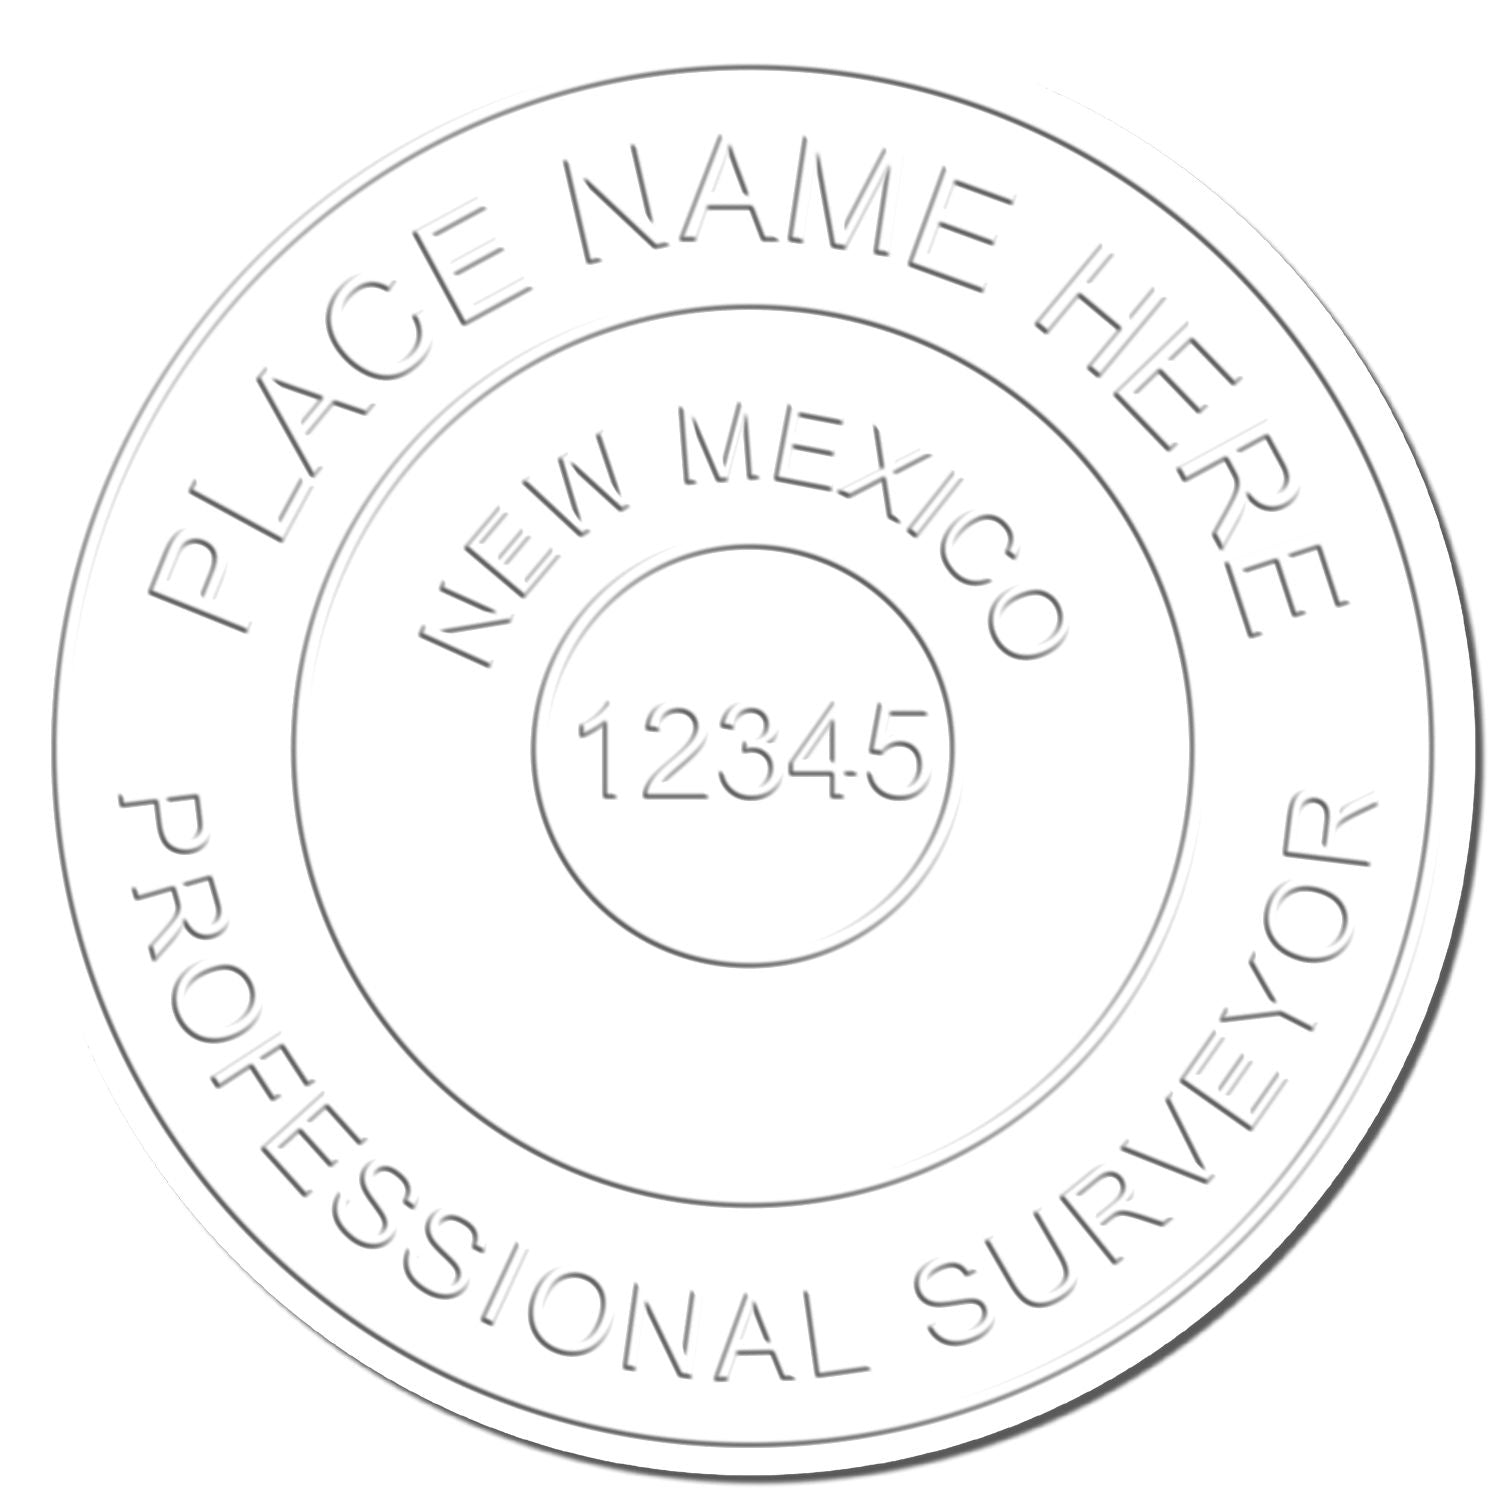 This paper is stamped with a sample imprint of the Extended Long Reach New Mexico Surveyor Embosser, signifying its quality and reliability.